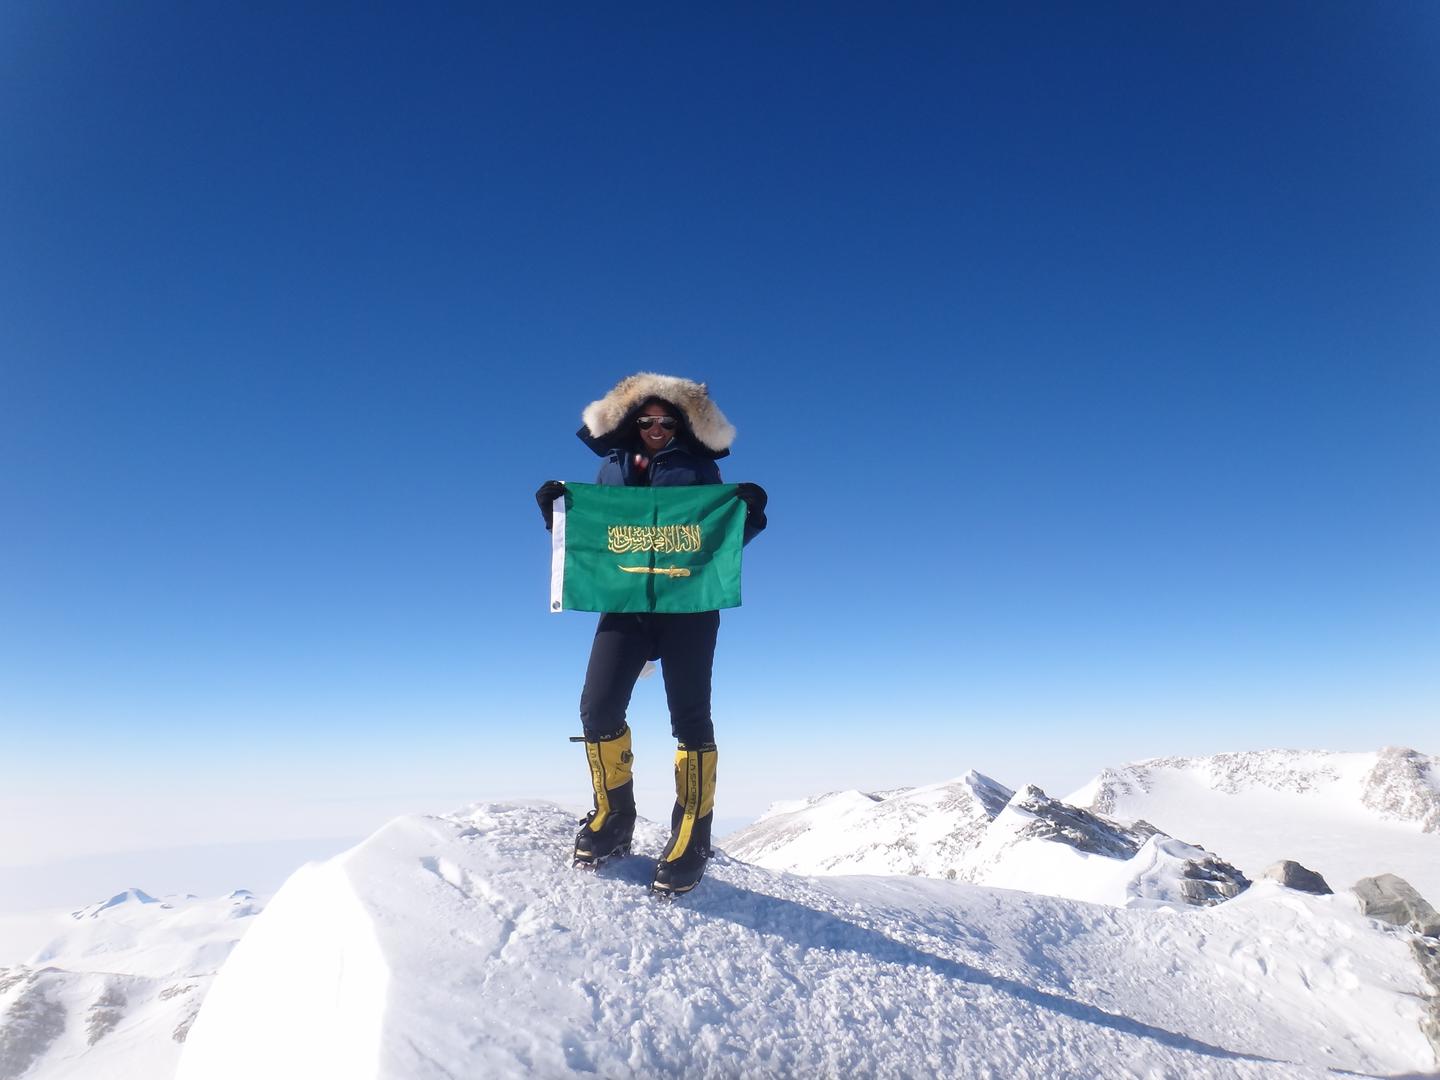 Raha Moharrak holds the Saudi Flag on Mount Everest as Saudi Arabia’s first female and youngest Arab to reach the summit. With limited training facilities in Saudi Arabia, Moharrak taught herself to climb. In one year, she reached the peak of eight mounta